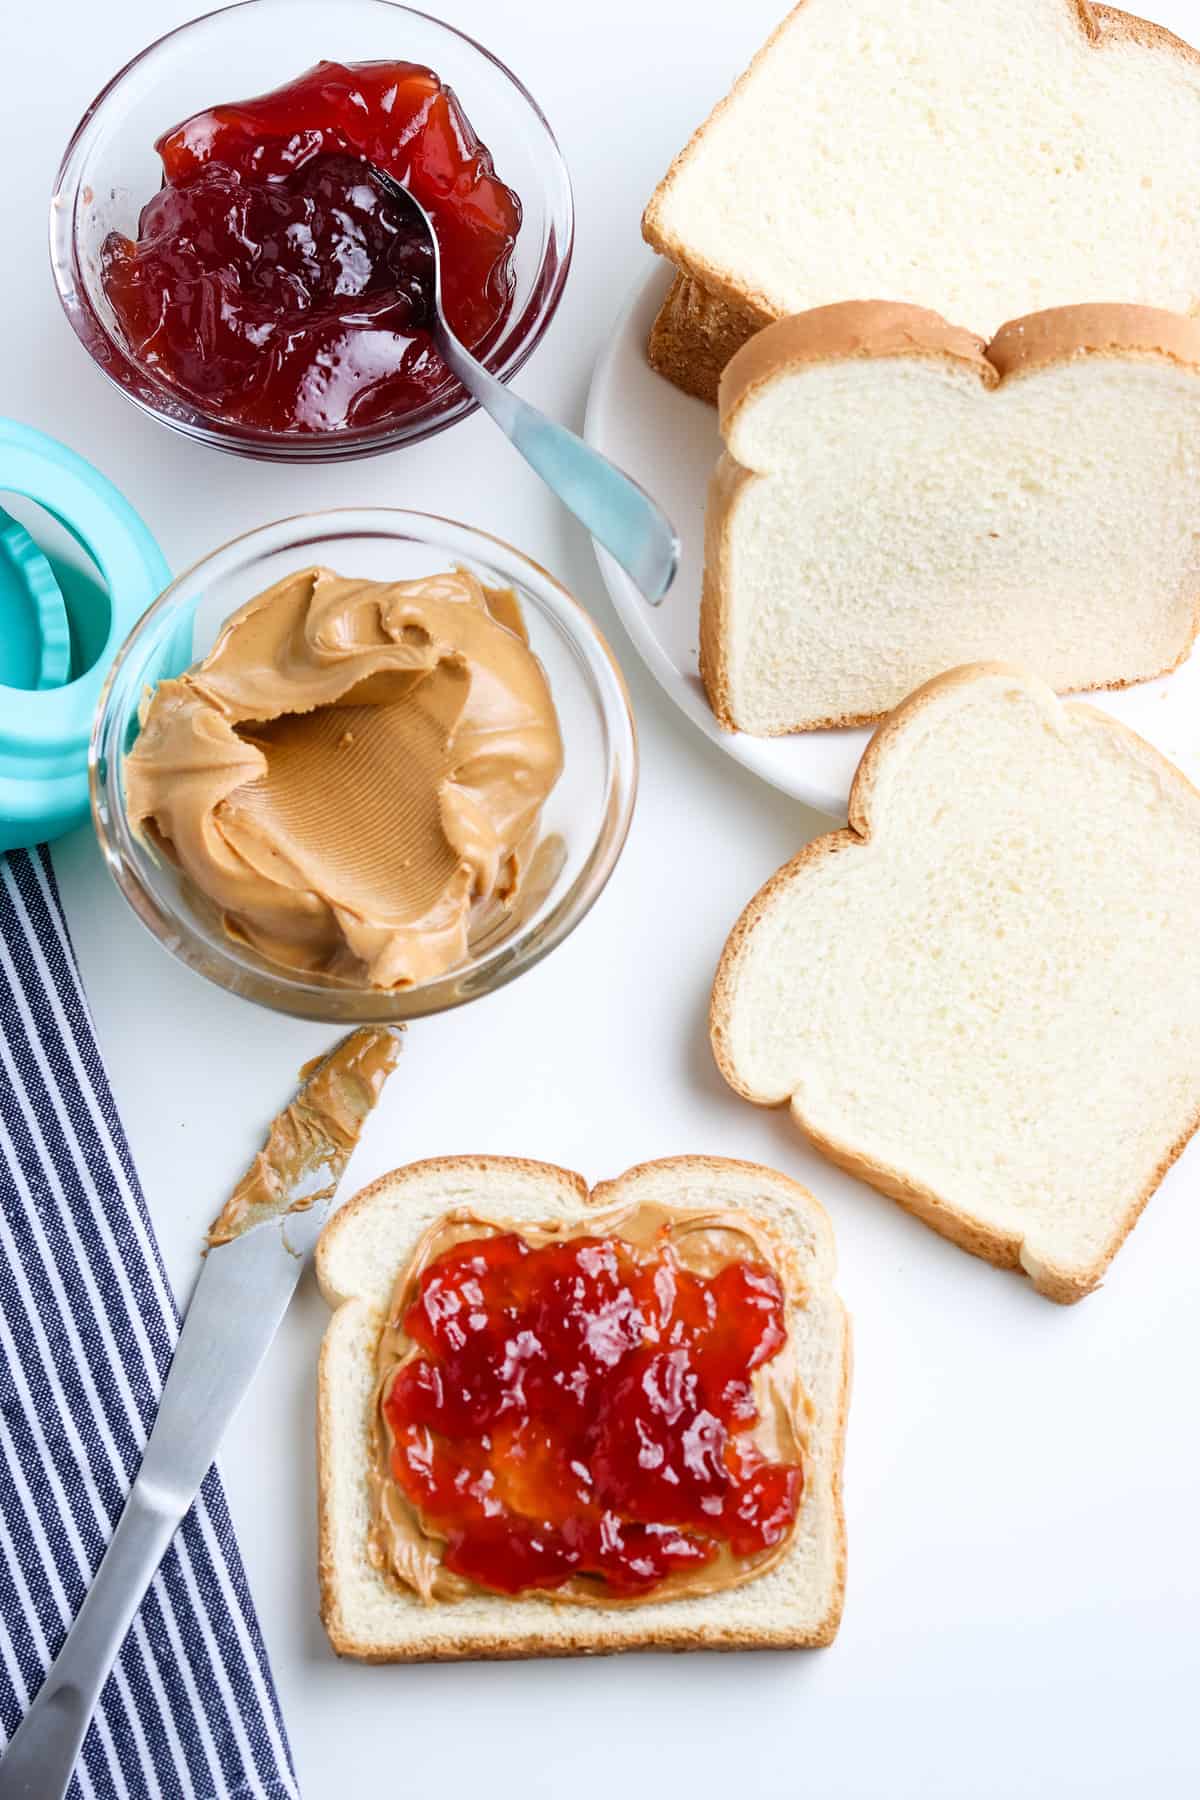 Spread Jelly On Top of the Peanut Butter